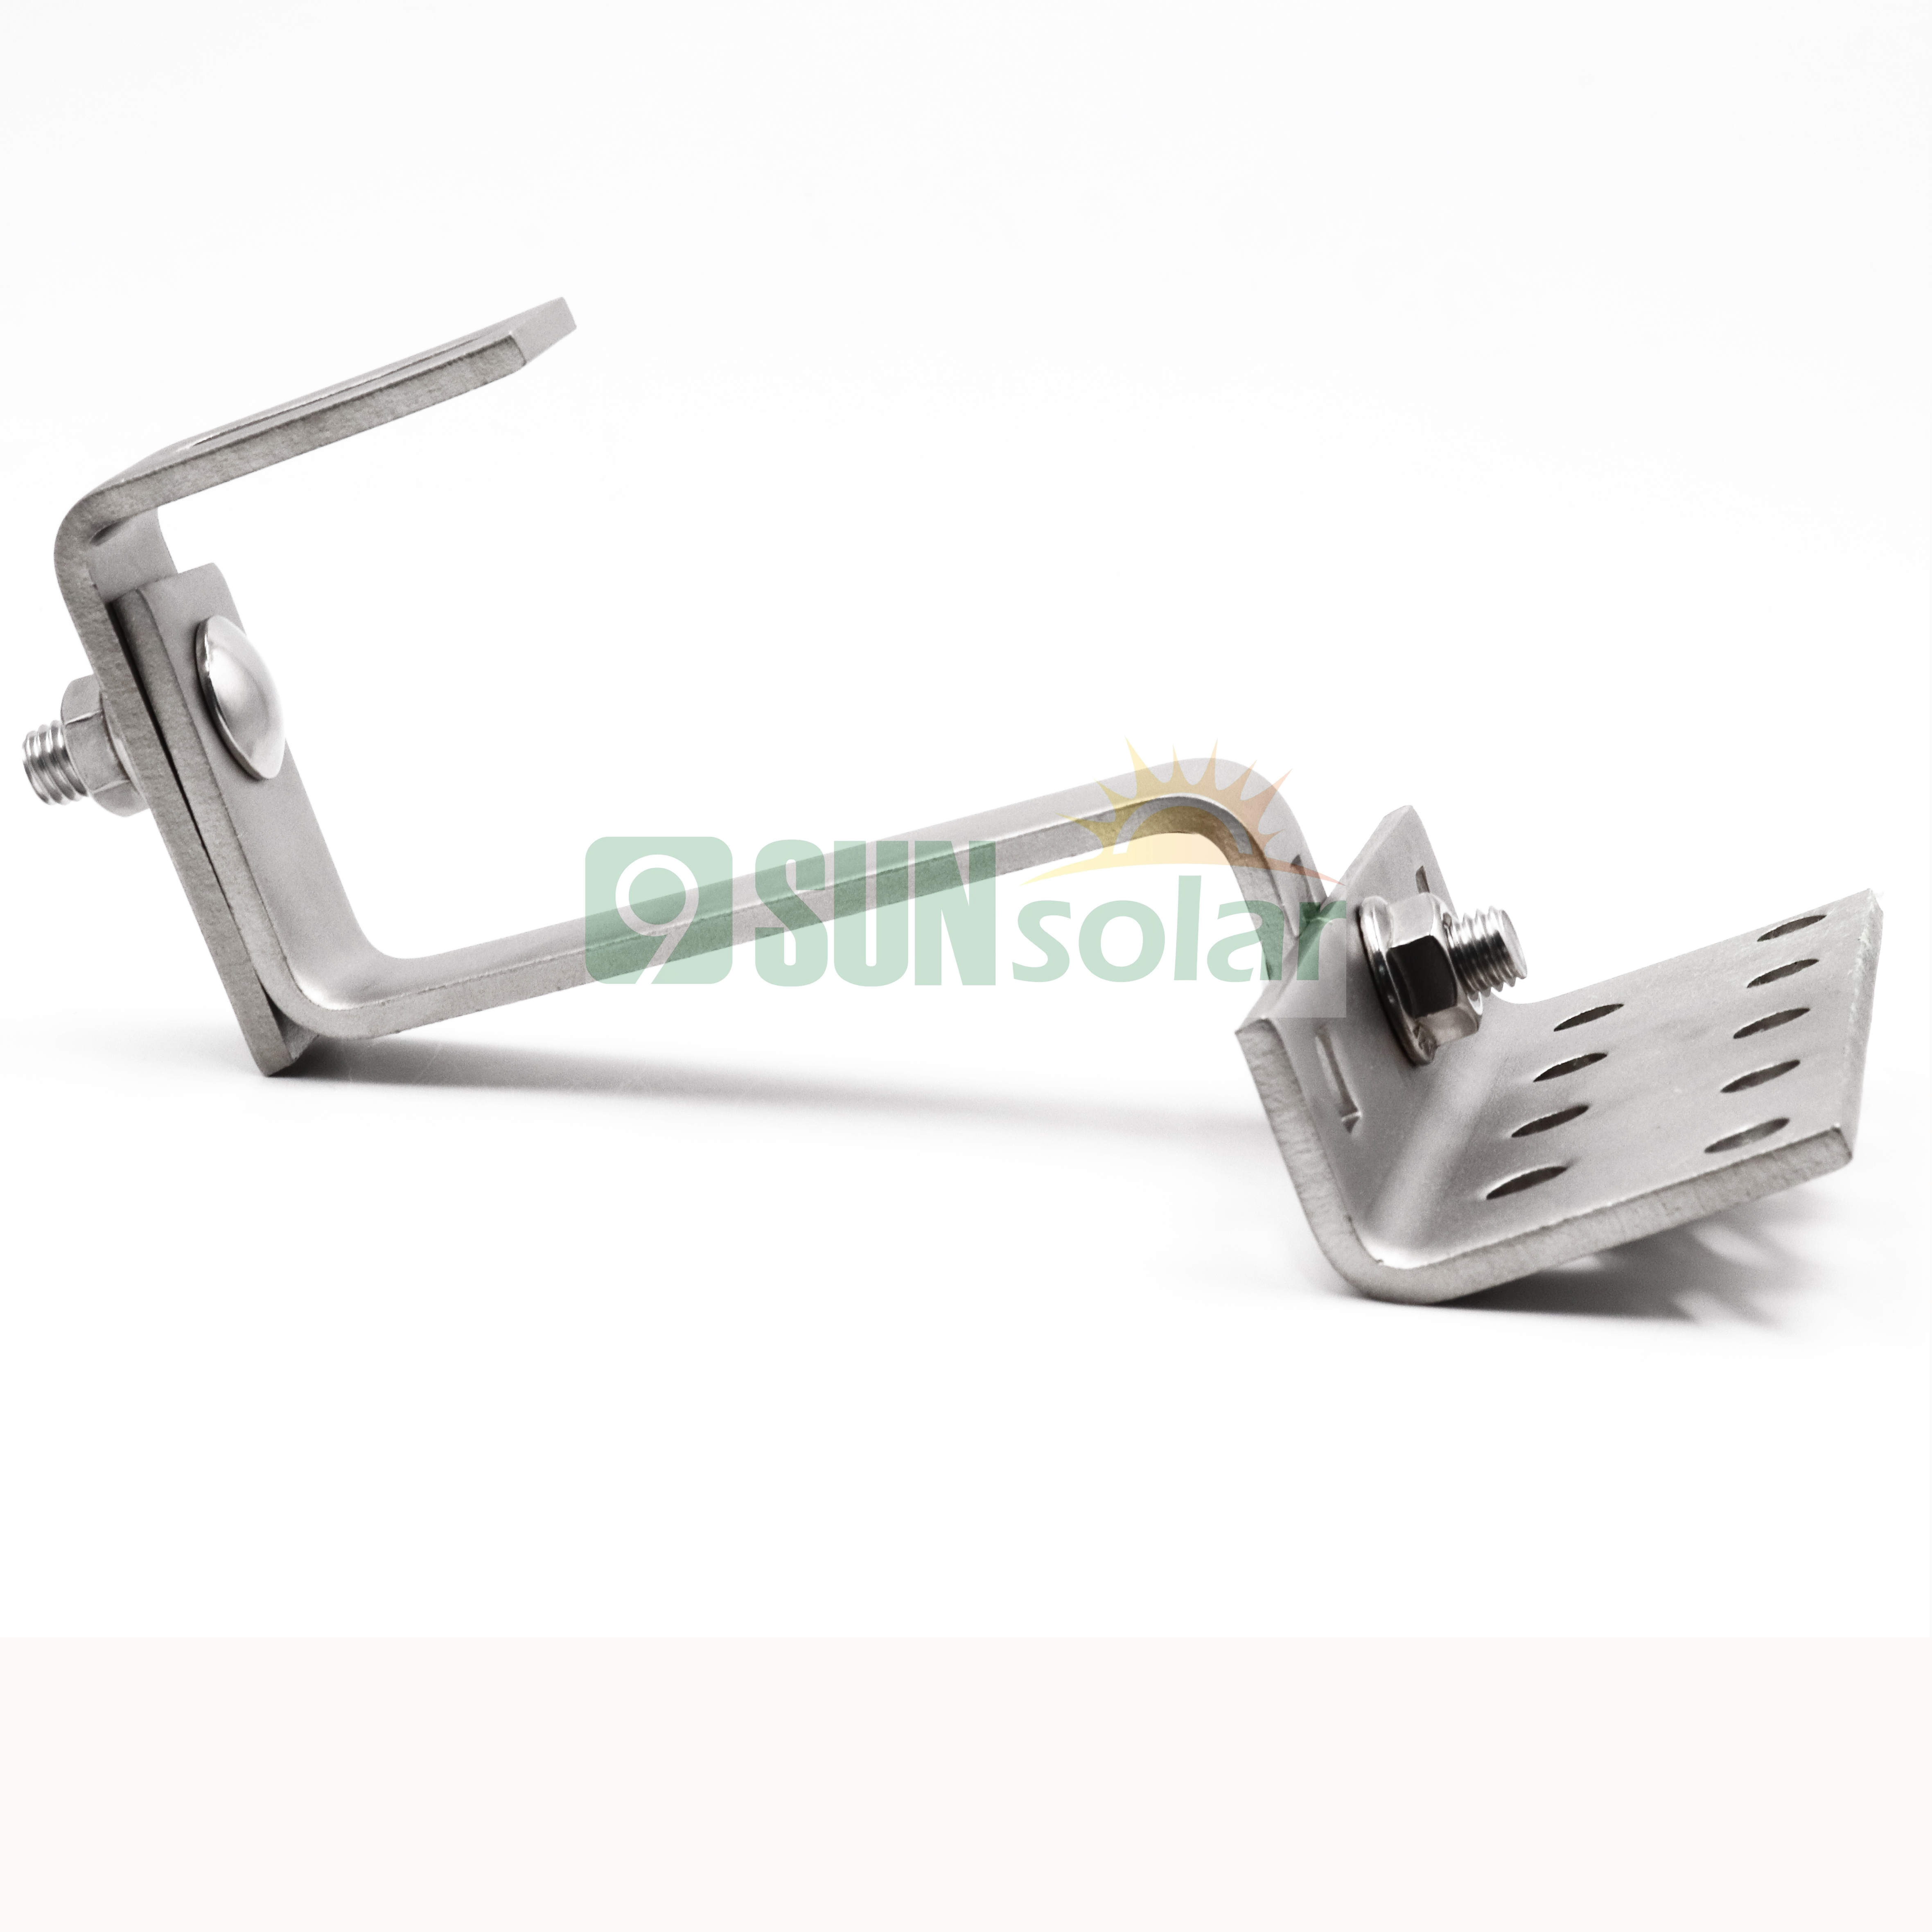 Mounting solar systems double adjustable stainless steel solar tile roof hook for the installation of solar panels on the roof